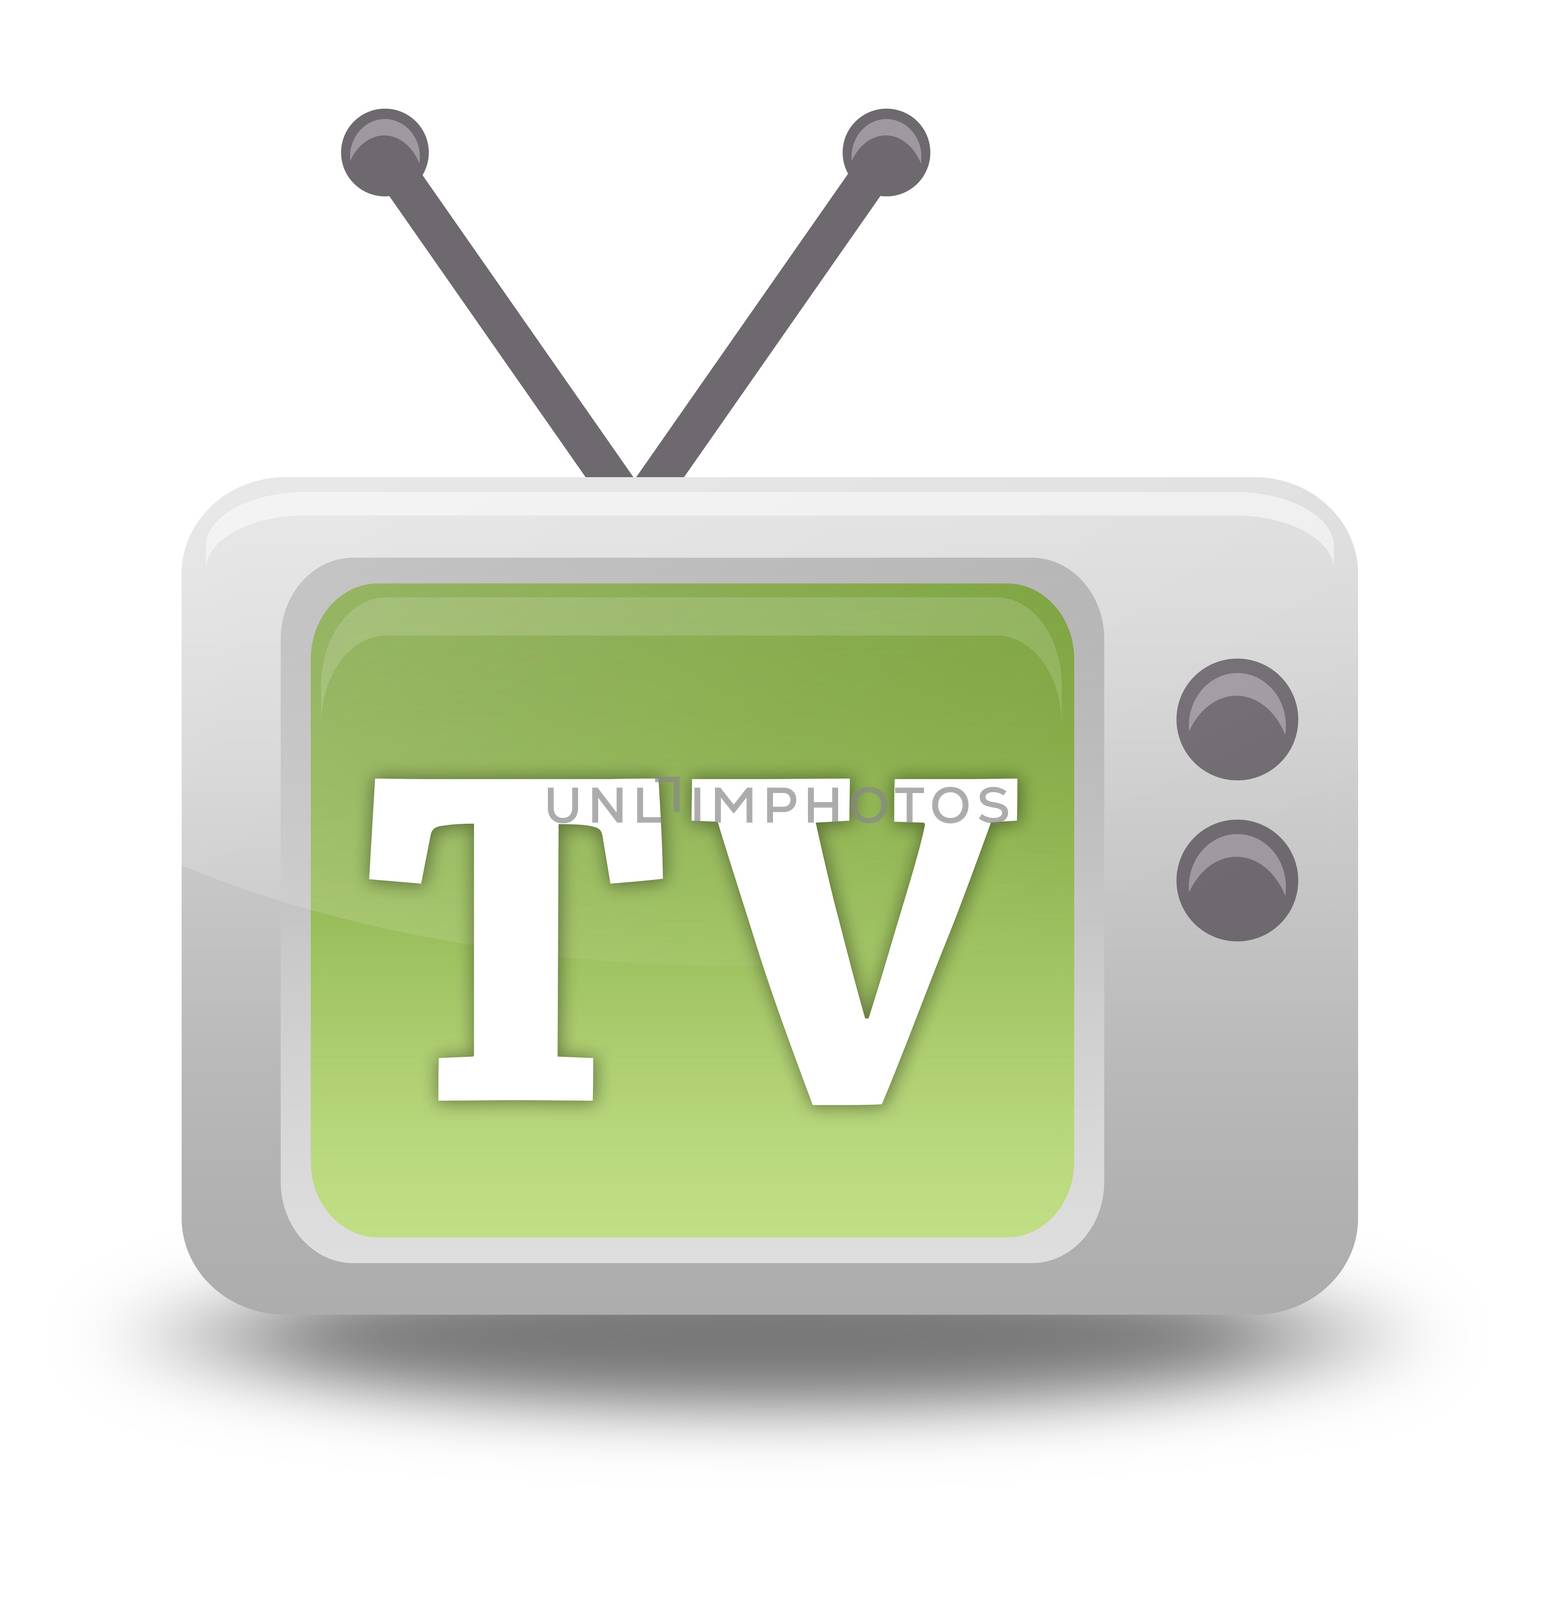 Cartoon-style TV icon by mindscanner